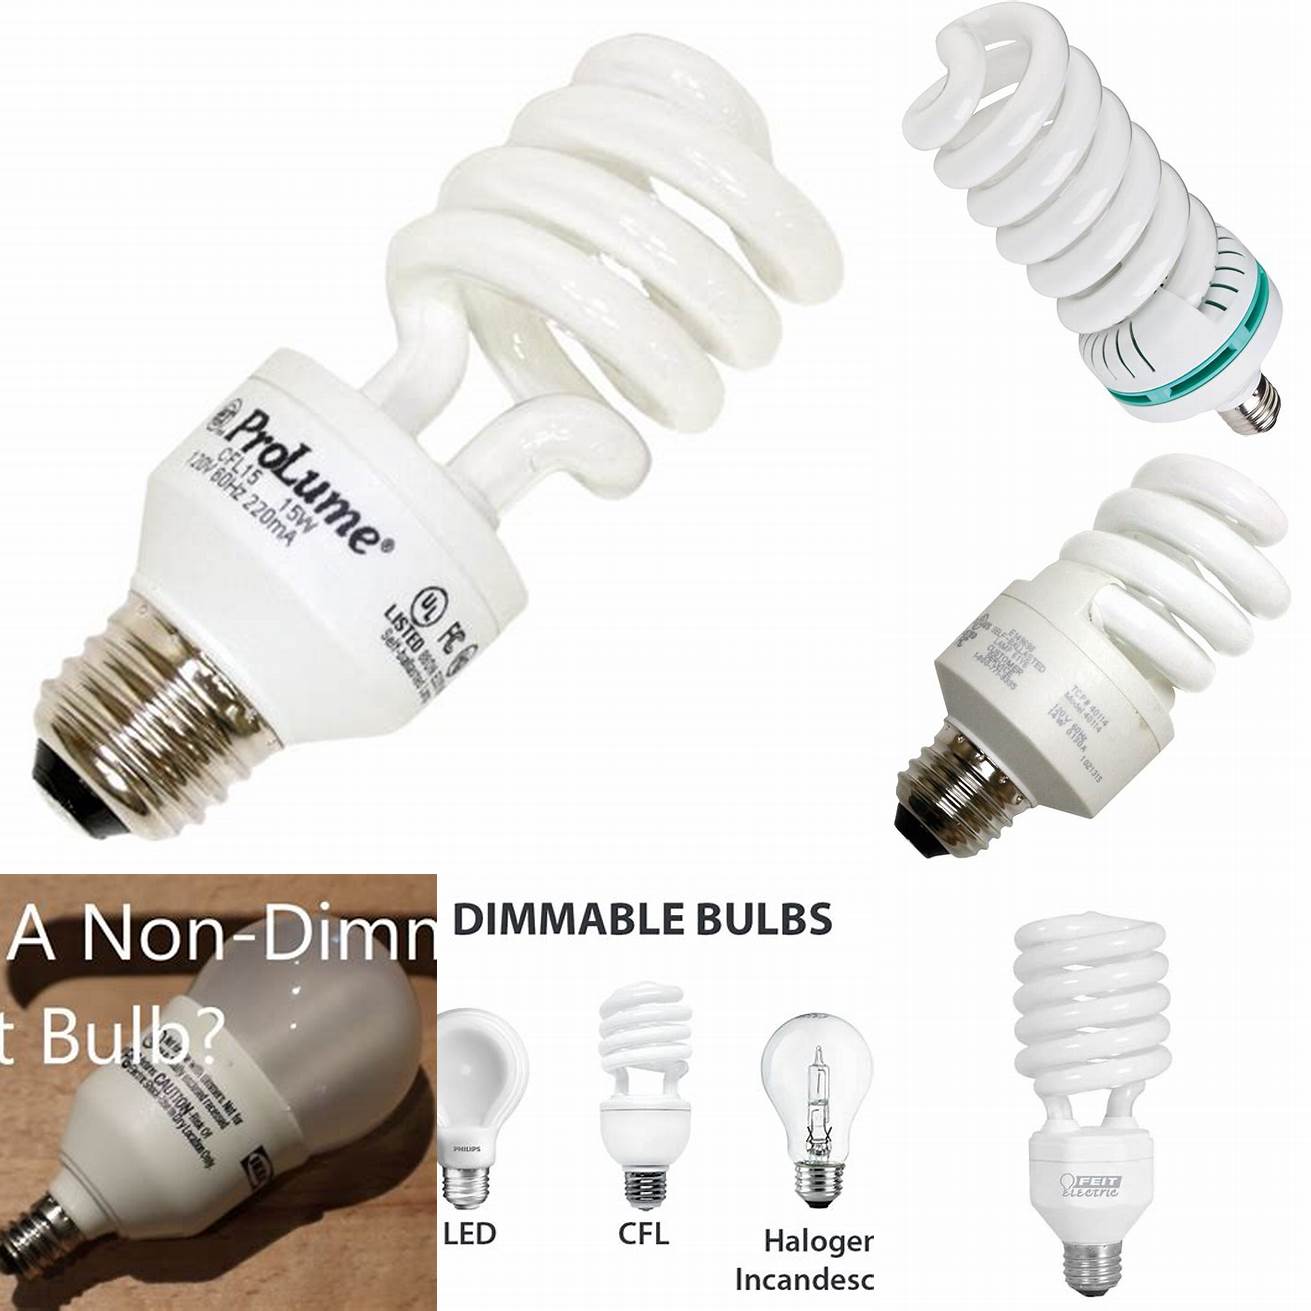 Not dimmable Fluorescent bulbs are not dimmable which means you wont be able to adjust the brightness of your kitchen lighting